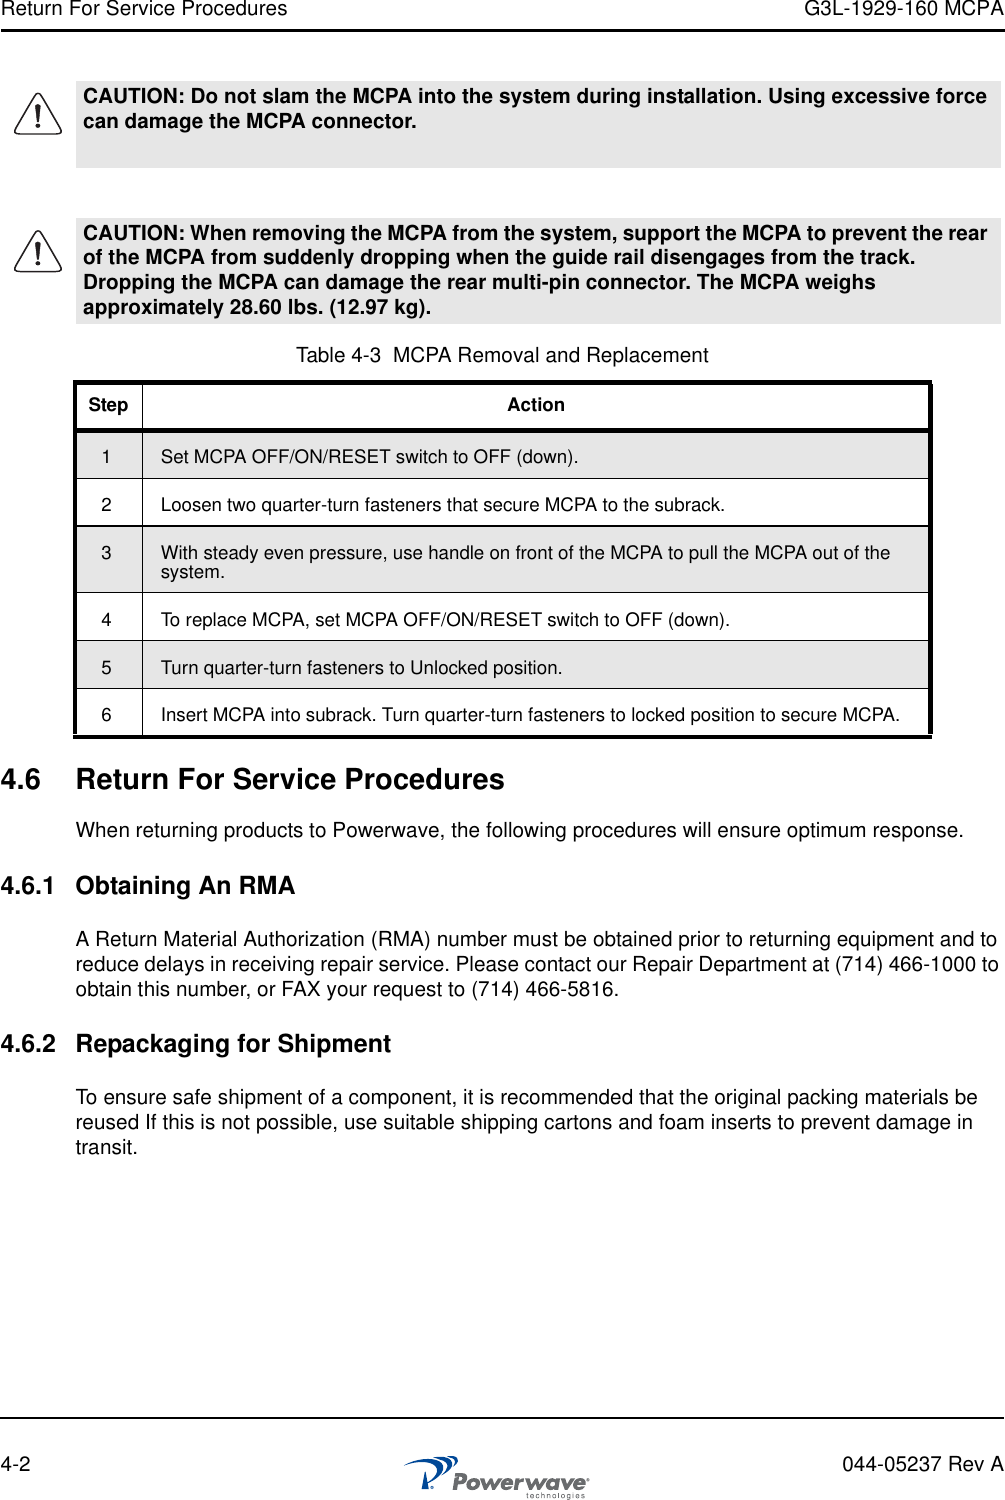 Return For Service Procedures G3L-1929-160 MCPA4-2 044-05237 Rev A4.6 Return For Service ProceduresWhen returning products to Powerwave, the following procedures will ensure optimum response.4.6.1 Obtaining An RMAA Return Material Authorization (RMA) number must be obtained prior to returning equipment and to reduce delays in receiving repair service. Please contact our Repair Department at (714) 466-1000 to obtain this number, or FAX your request to (714) 466-5816.4.6.2 Repackaging for ShipmentTo ensure safe shipment of a component, it is recommended that the original packing materials be reused If this is not possible, use suitable shipping cartons and foam inserts to prevent damage in transit.CAUTION: Do not slam the MCPA into the system during installation. Using excessive force can damage the MCPA connector.CAUTION: When removing the MCPA from the system, support the MCPA to prevent the rear of the MCPA from suddenly dropping when the guide rail disengages from the track. Dropping the MCPA can damage the rear multi-pin connector. The MCPA weighs approximately 28.60 lbs. (12.97 kg).Table 4-3  MCPA Removal and ReplacementStep Action1Set MCPA OFF/ON/RESET switch to OFF (down).2 Loosen two quarter-turn fasteners that secure MCPA to the subrack.3With steady even pressure, use handle on front of the MCPA to pull the MCPA out of the system.4 To replace MCPA, set MCPA OFF/ON/RESET switch to OFF (down).5Turn quarter-turn fasteners to Unlocked position. 6 Insert MCPA into subrack. Turn quarter-turn fasteners to locked position to secure MCPA.